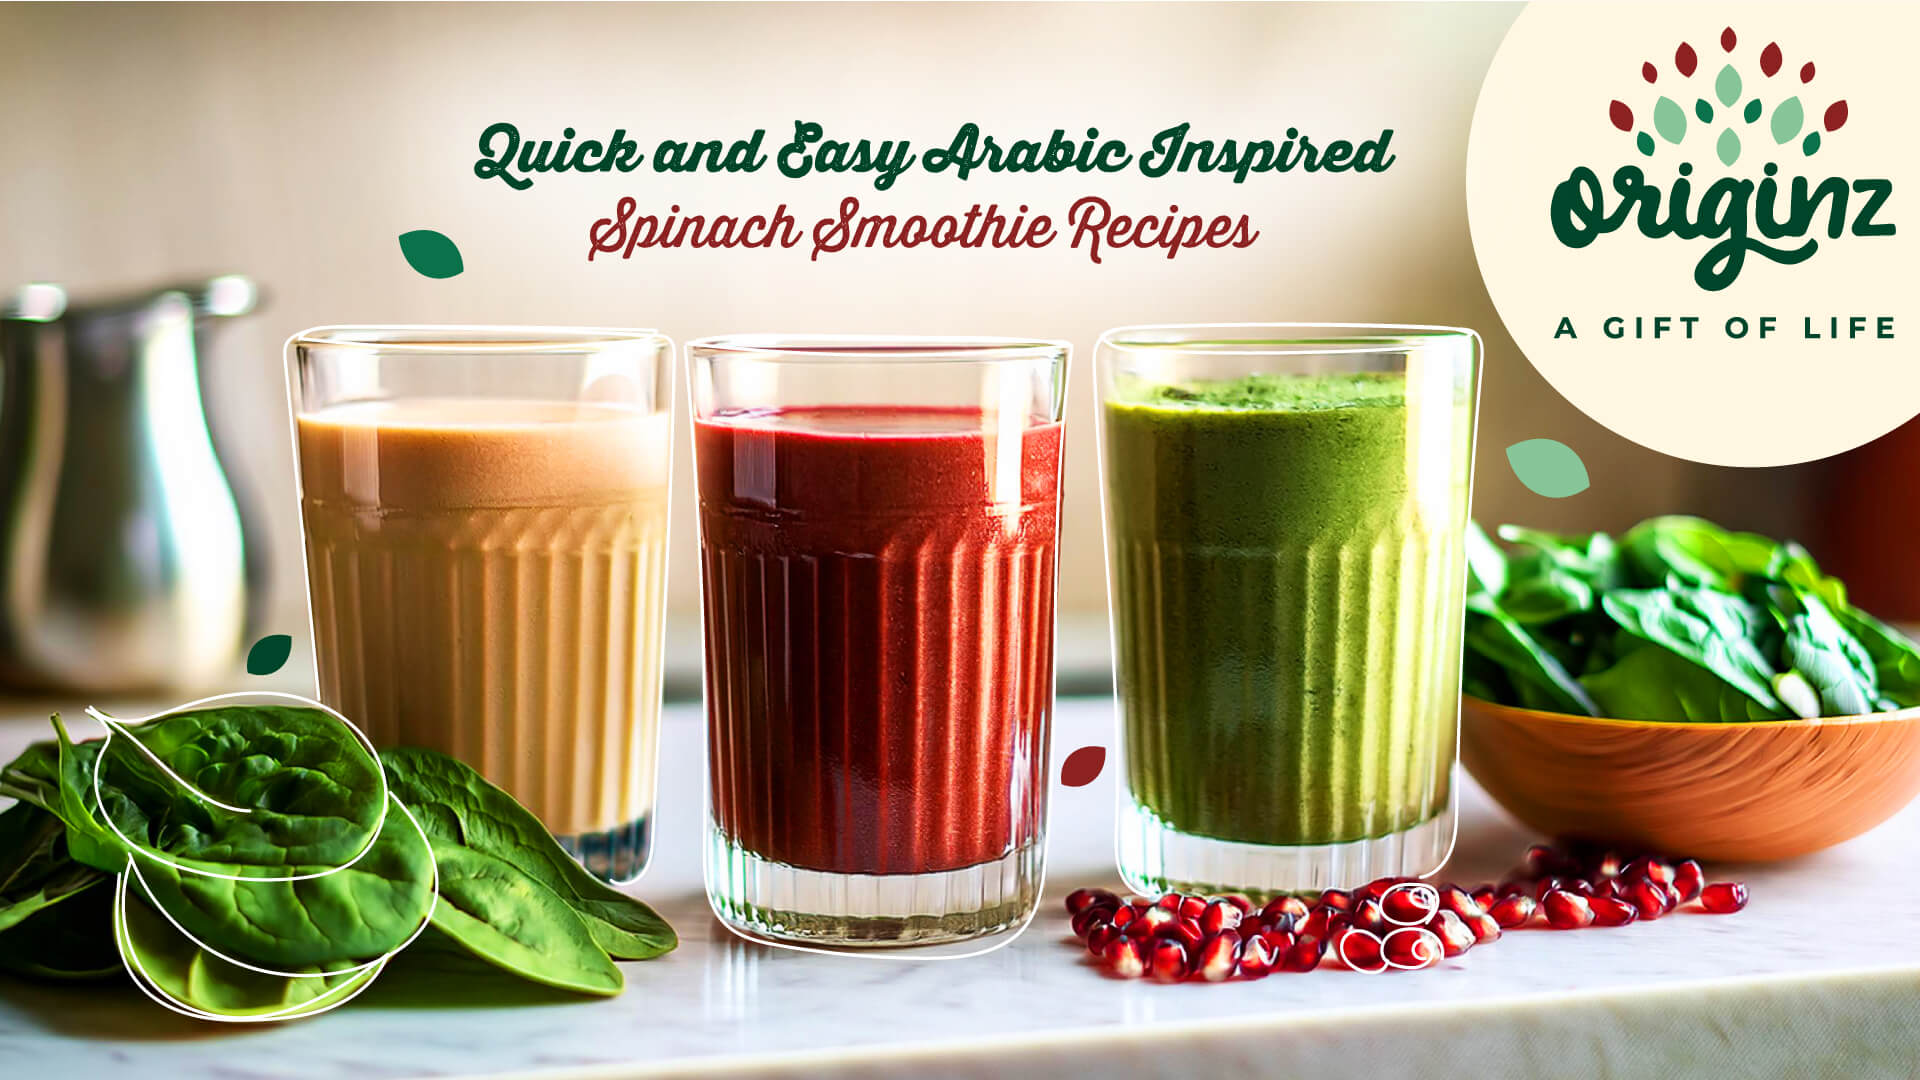 Quick and Easy Arabic Inspired Spinach Smoothie Recipes